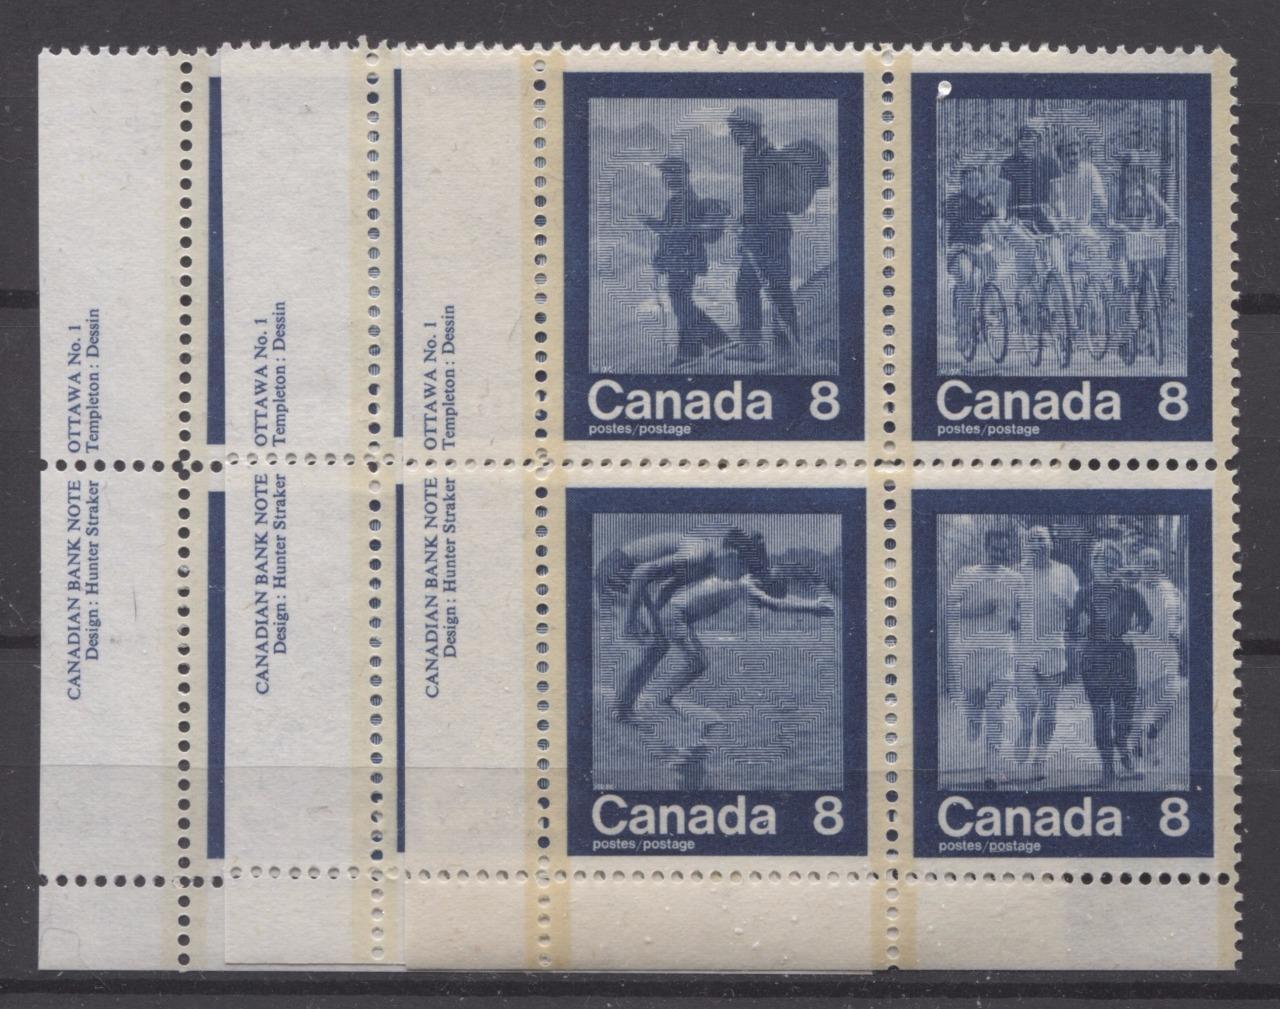 Canada #632a (SG#768a) 1974 Summer Sports Issue Block of 4 Paper/Tag Type 4 Plate 1 UR VF-80 NH Brixton Chrome 